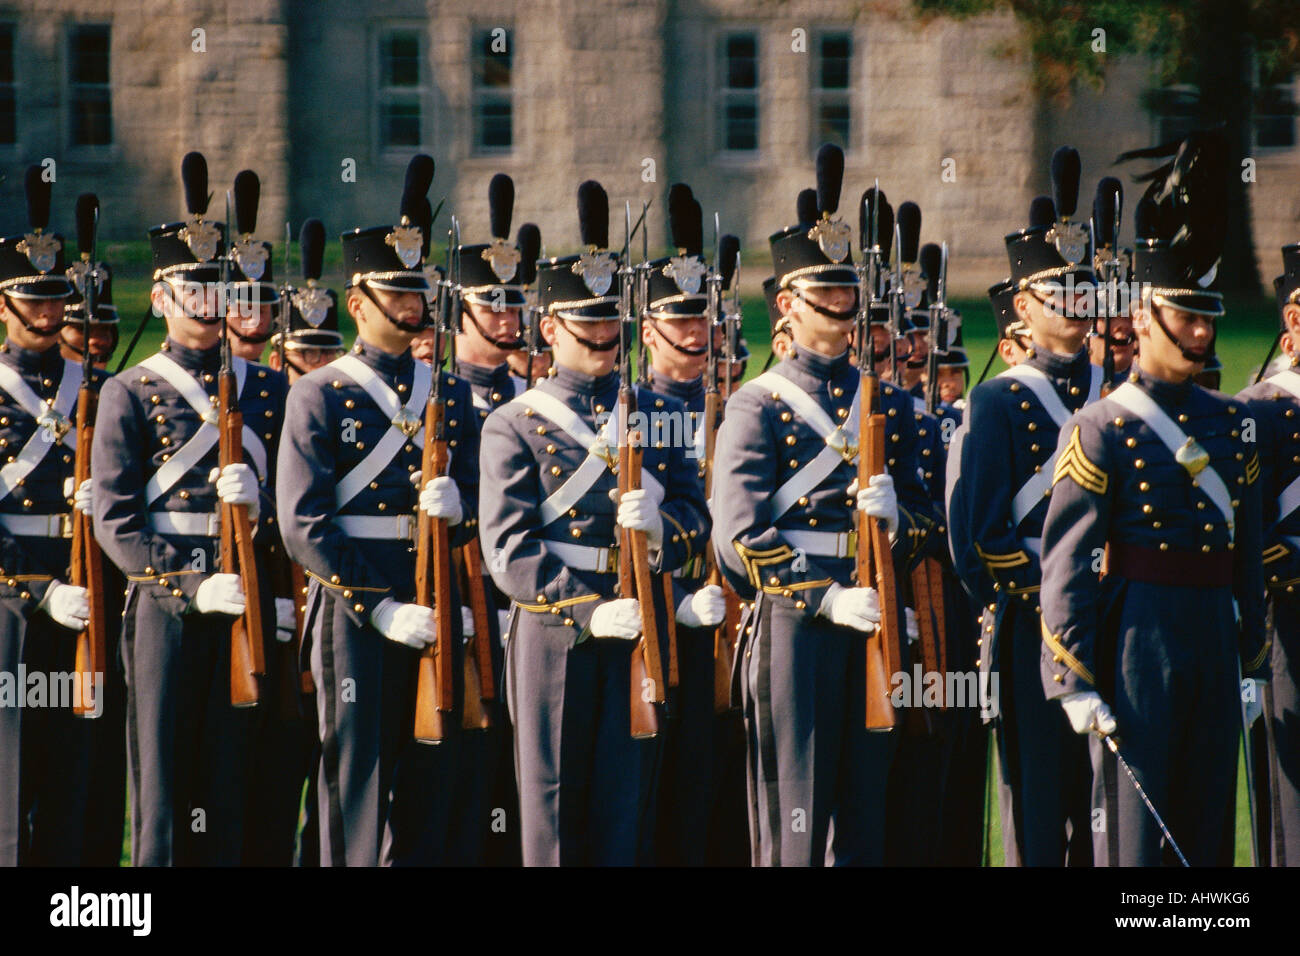 Soldiers standing at attention West Point Military Academy Stock Photo